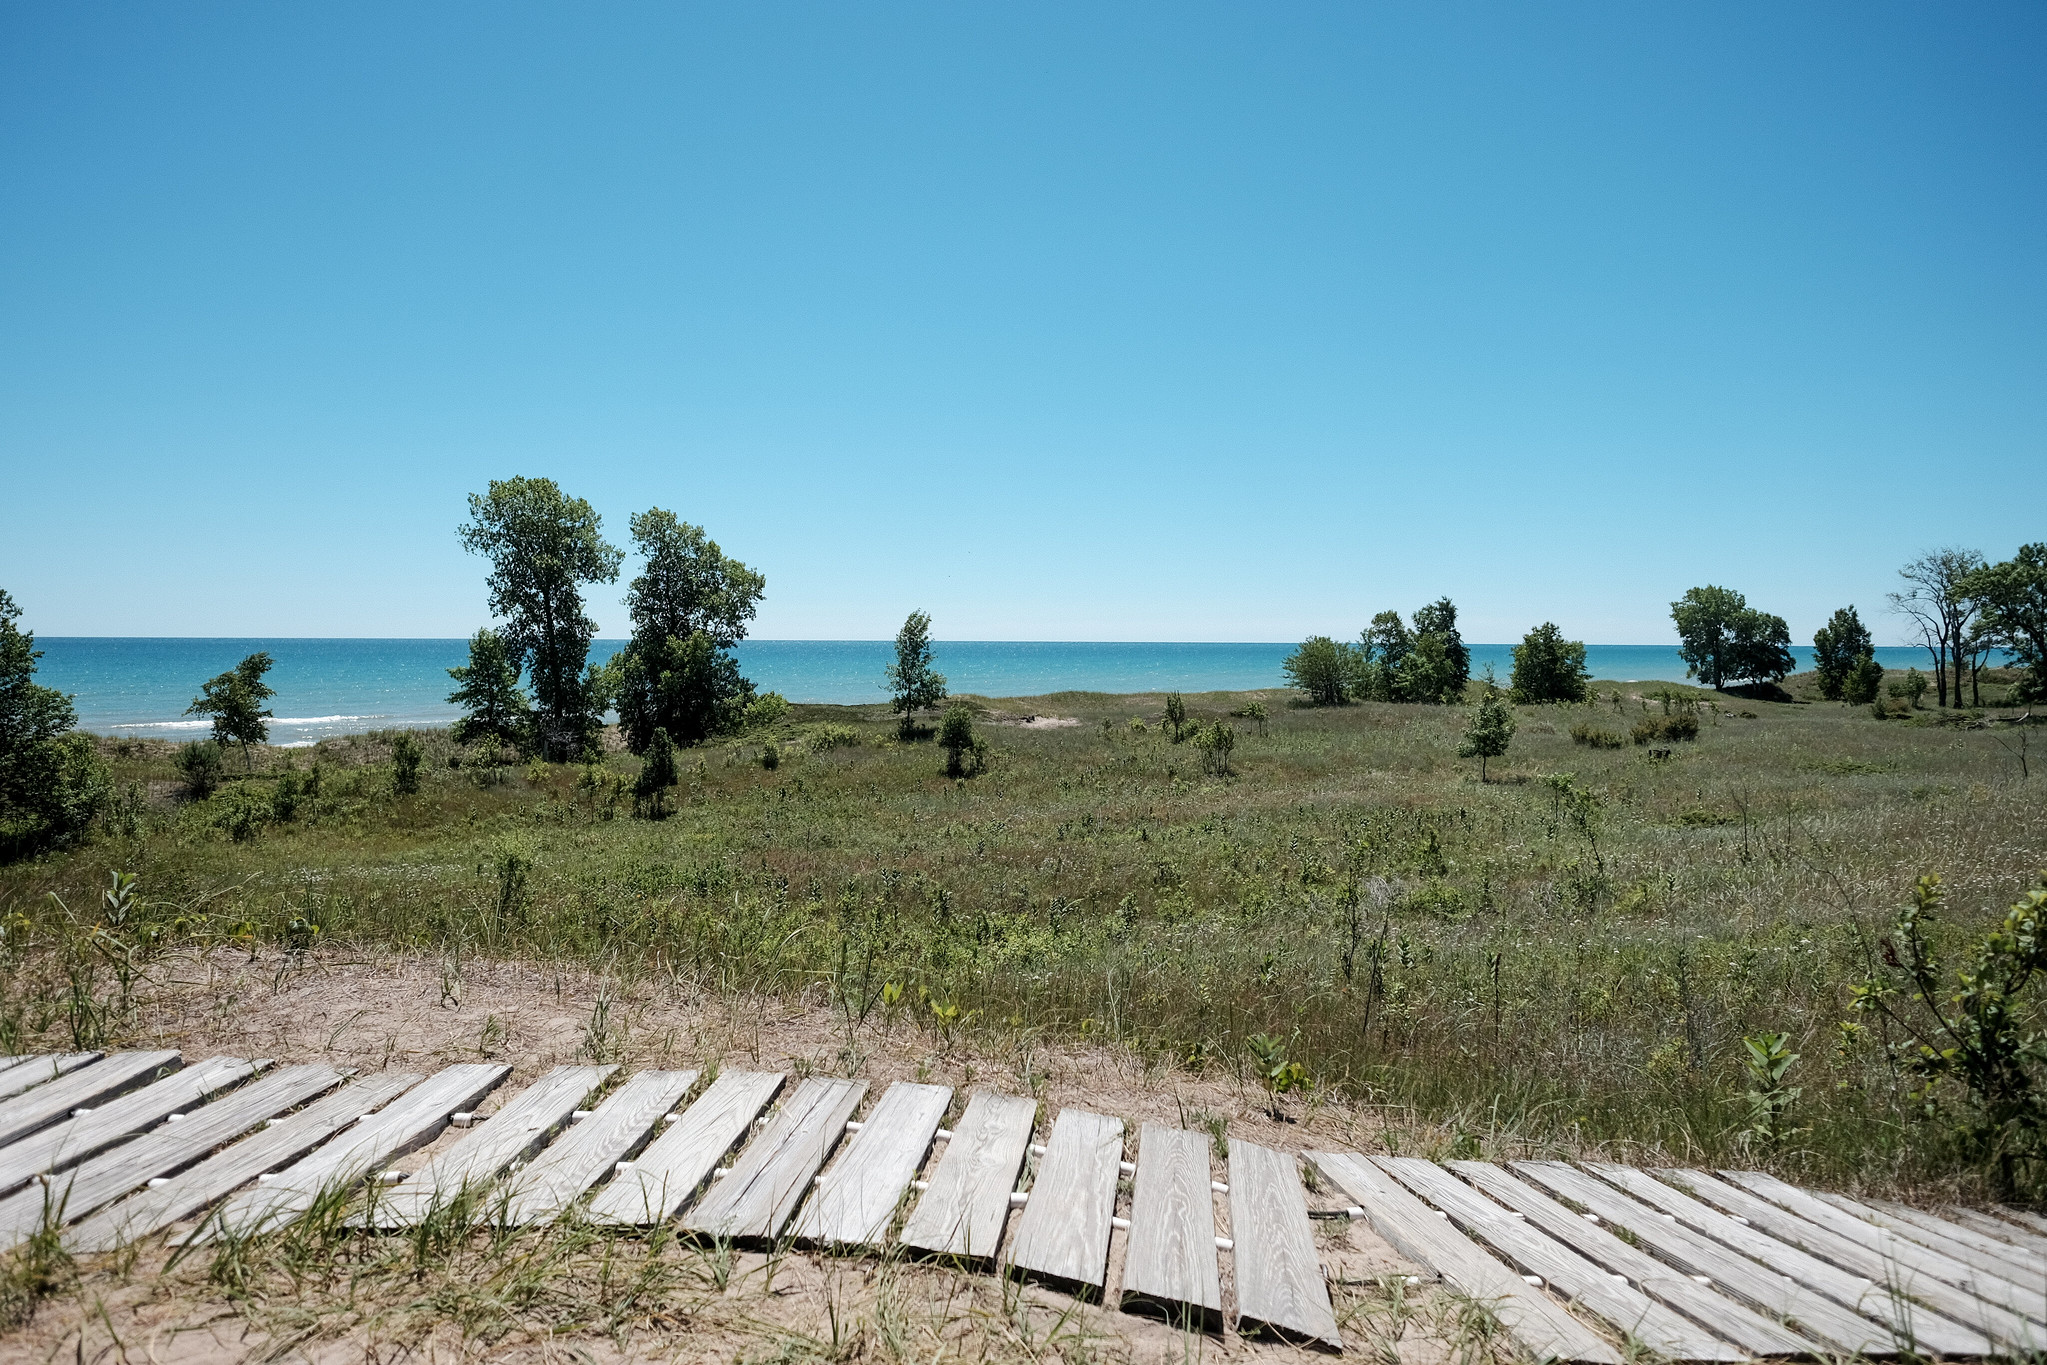 A long wooden cordwalk leads on a grassy sand dune. Lake Michigan is on the horizon. The sky is blue and cloudless.